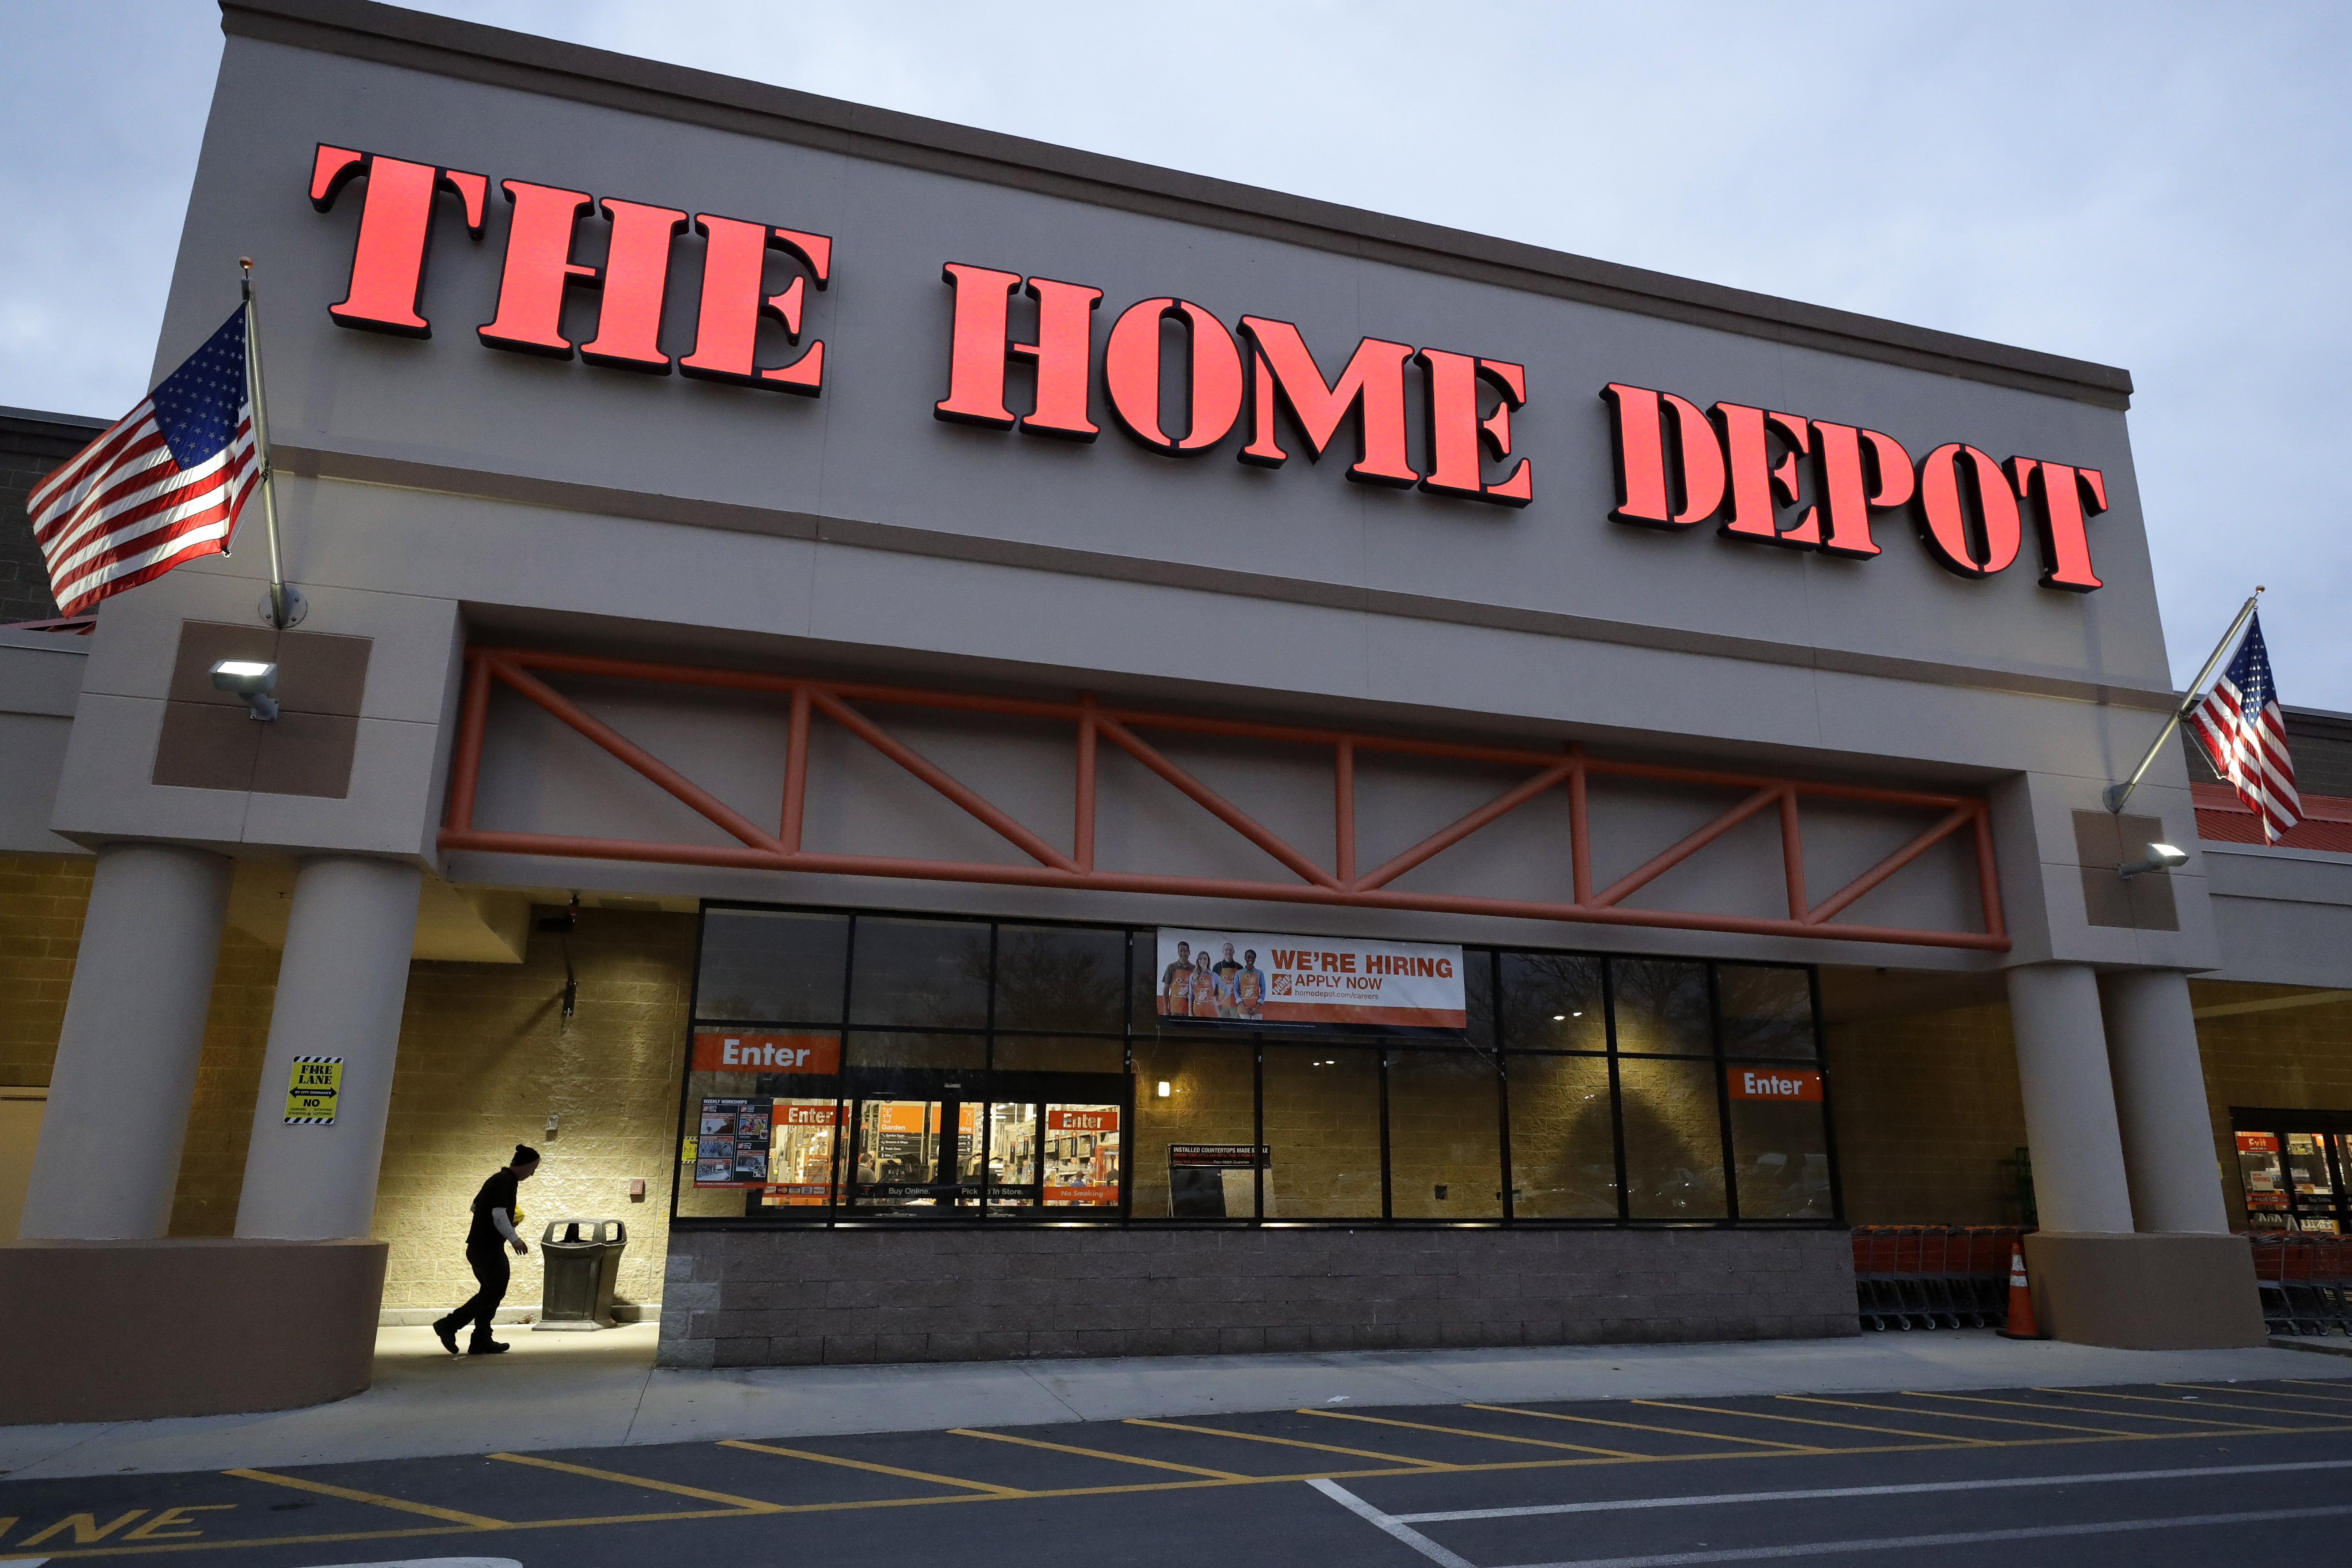 How The Home Depot Became the World's Largest Home-Improvement